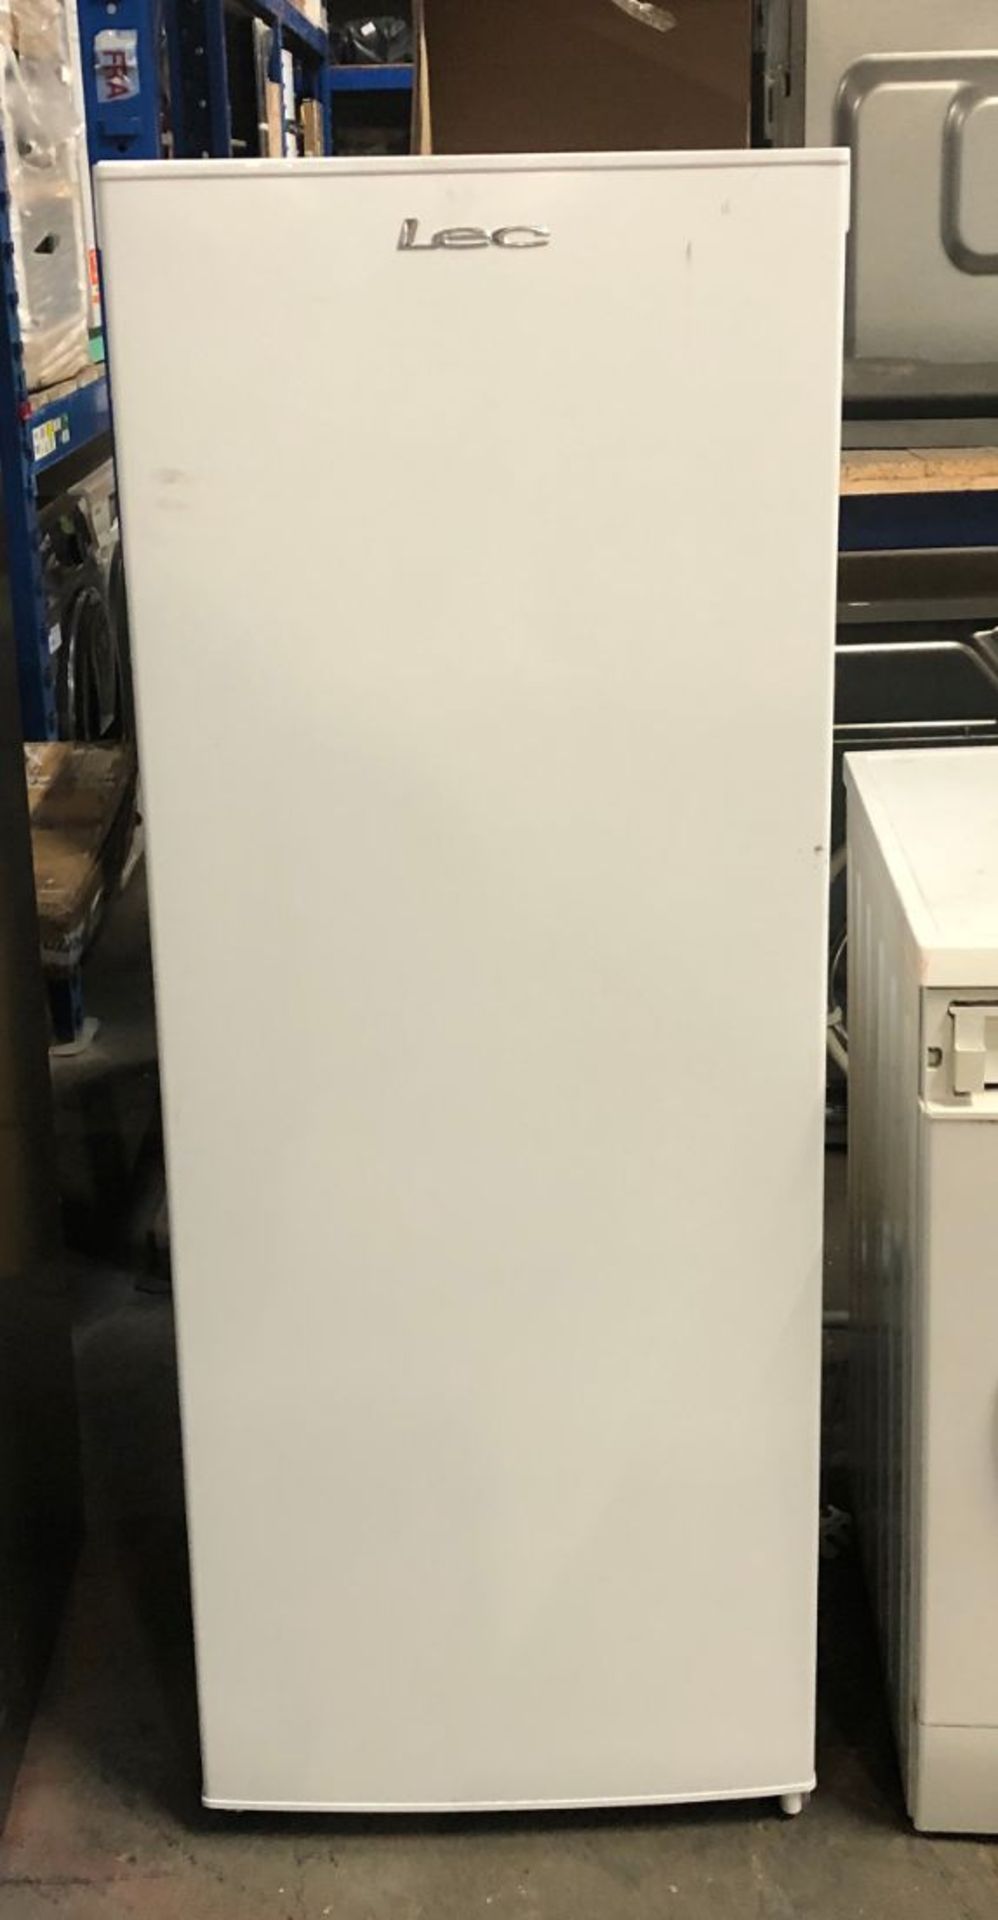 LEC FREESTANDING FRIDGE - TL5514W / UNTESTED, USED. SCUFF ON THE FRONT DOOR, NO OTHER VISIBLE